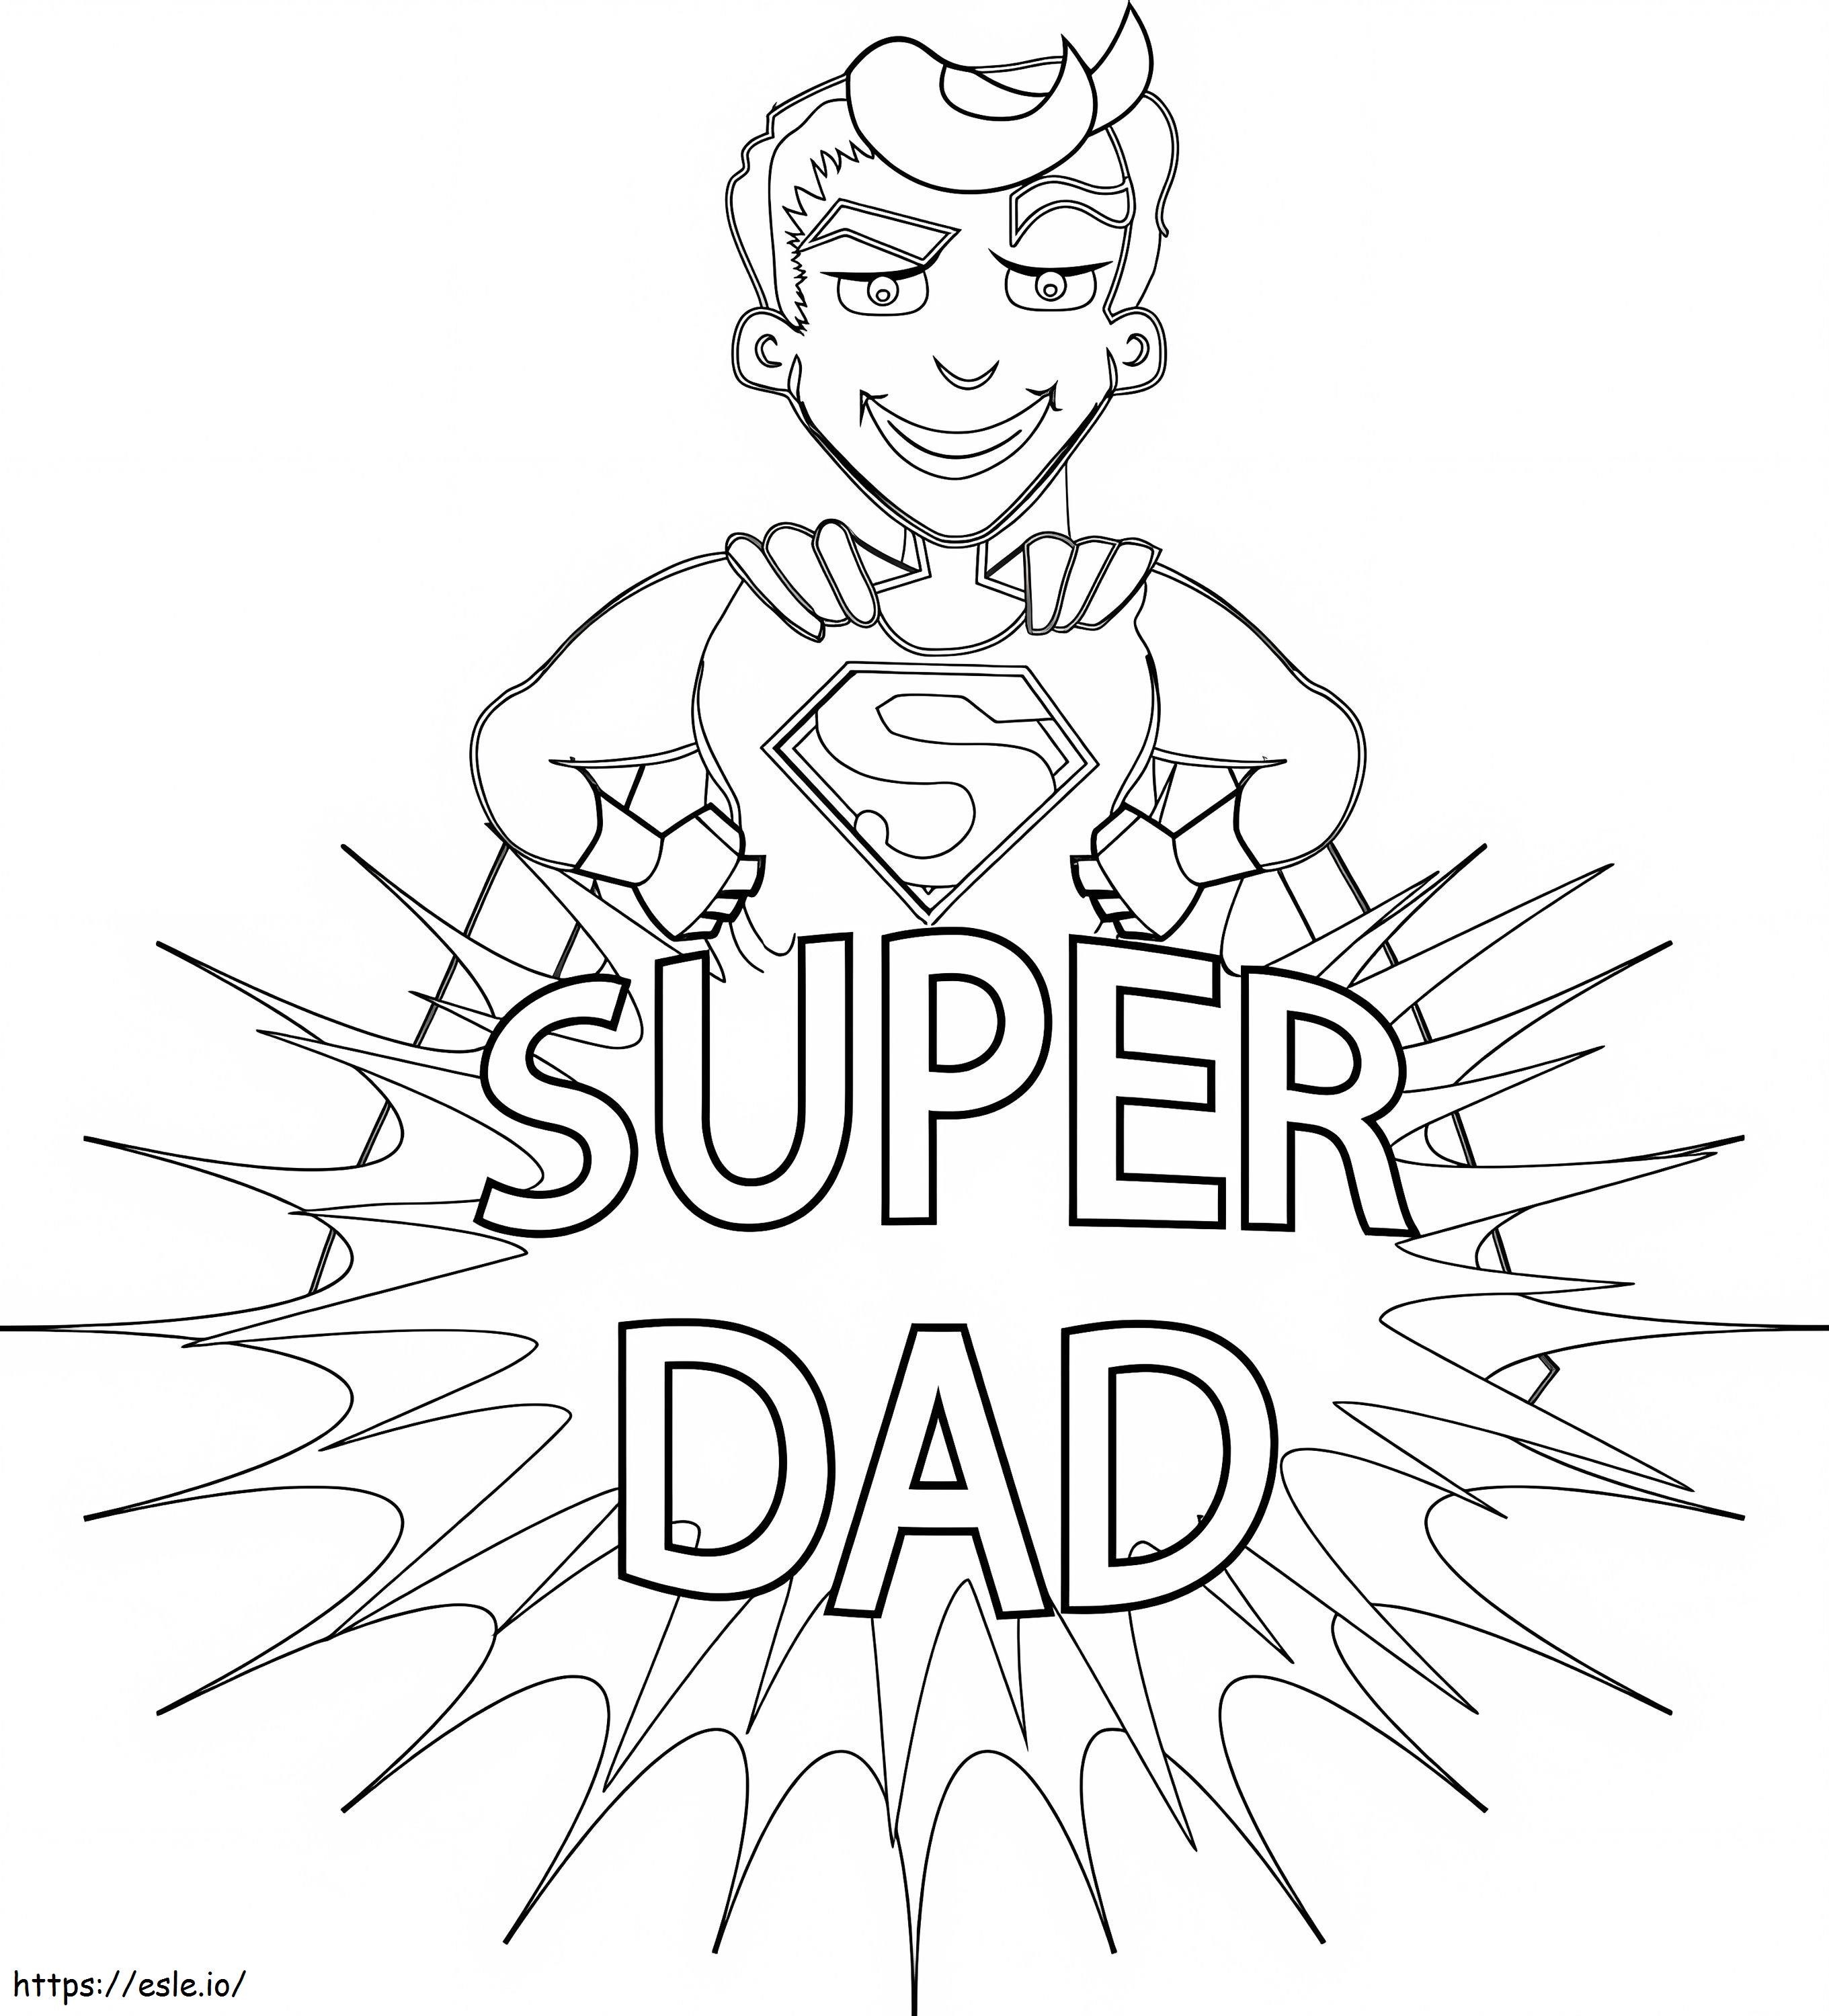 Super Dad Is Awesome coloring page